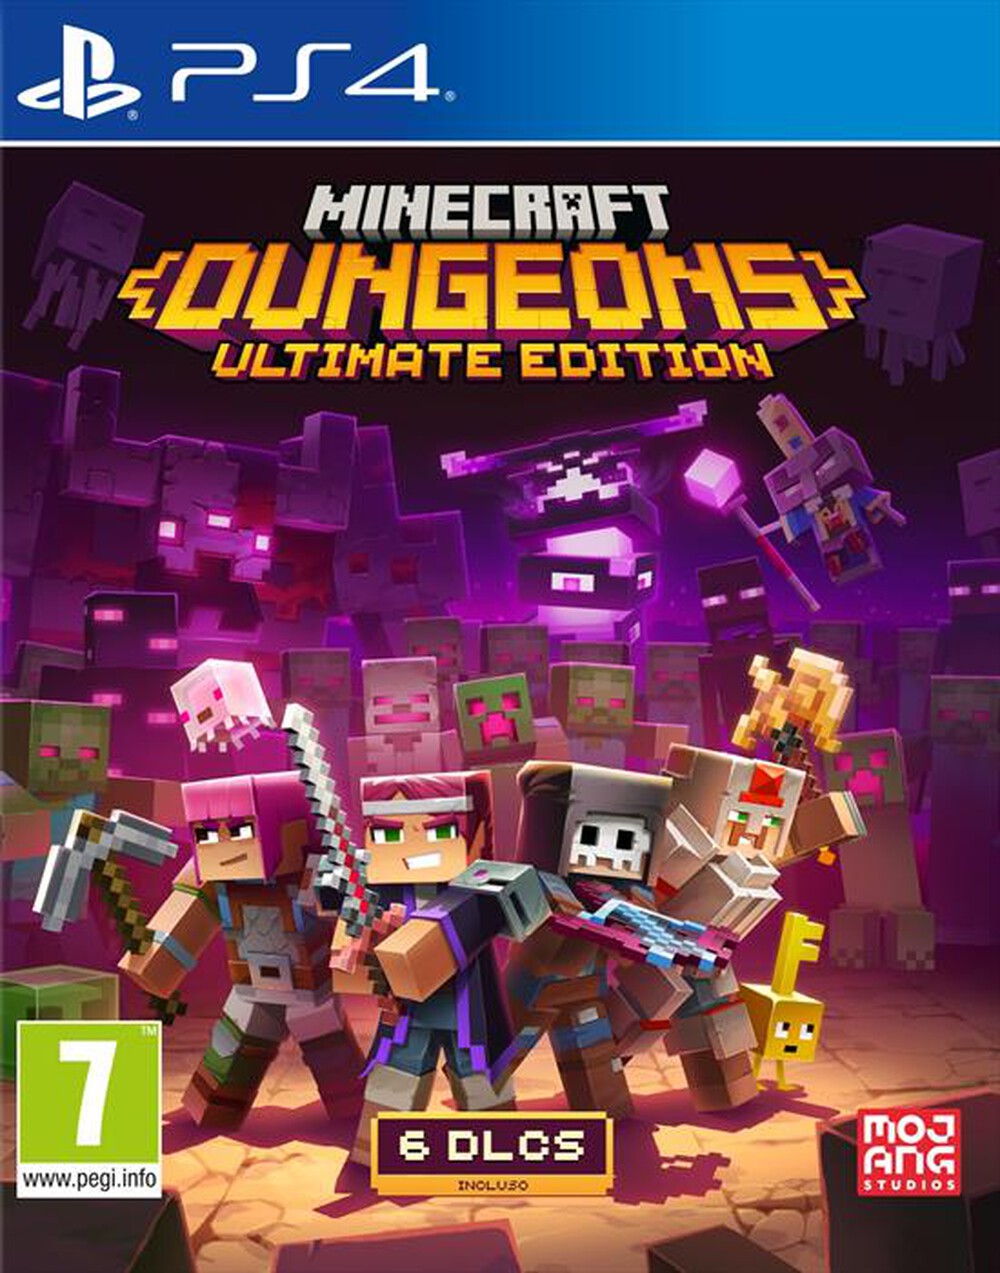 "FLASHPOINT DE - MINECRAFT DUNGEONS ULTIMATE EDITION PS4"